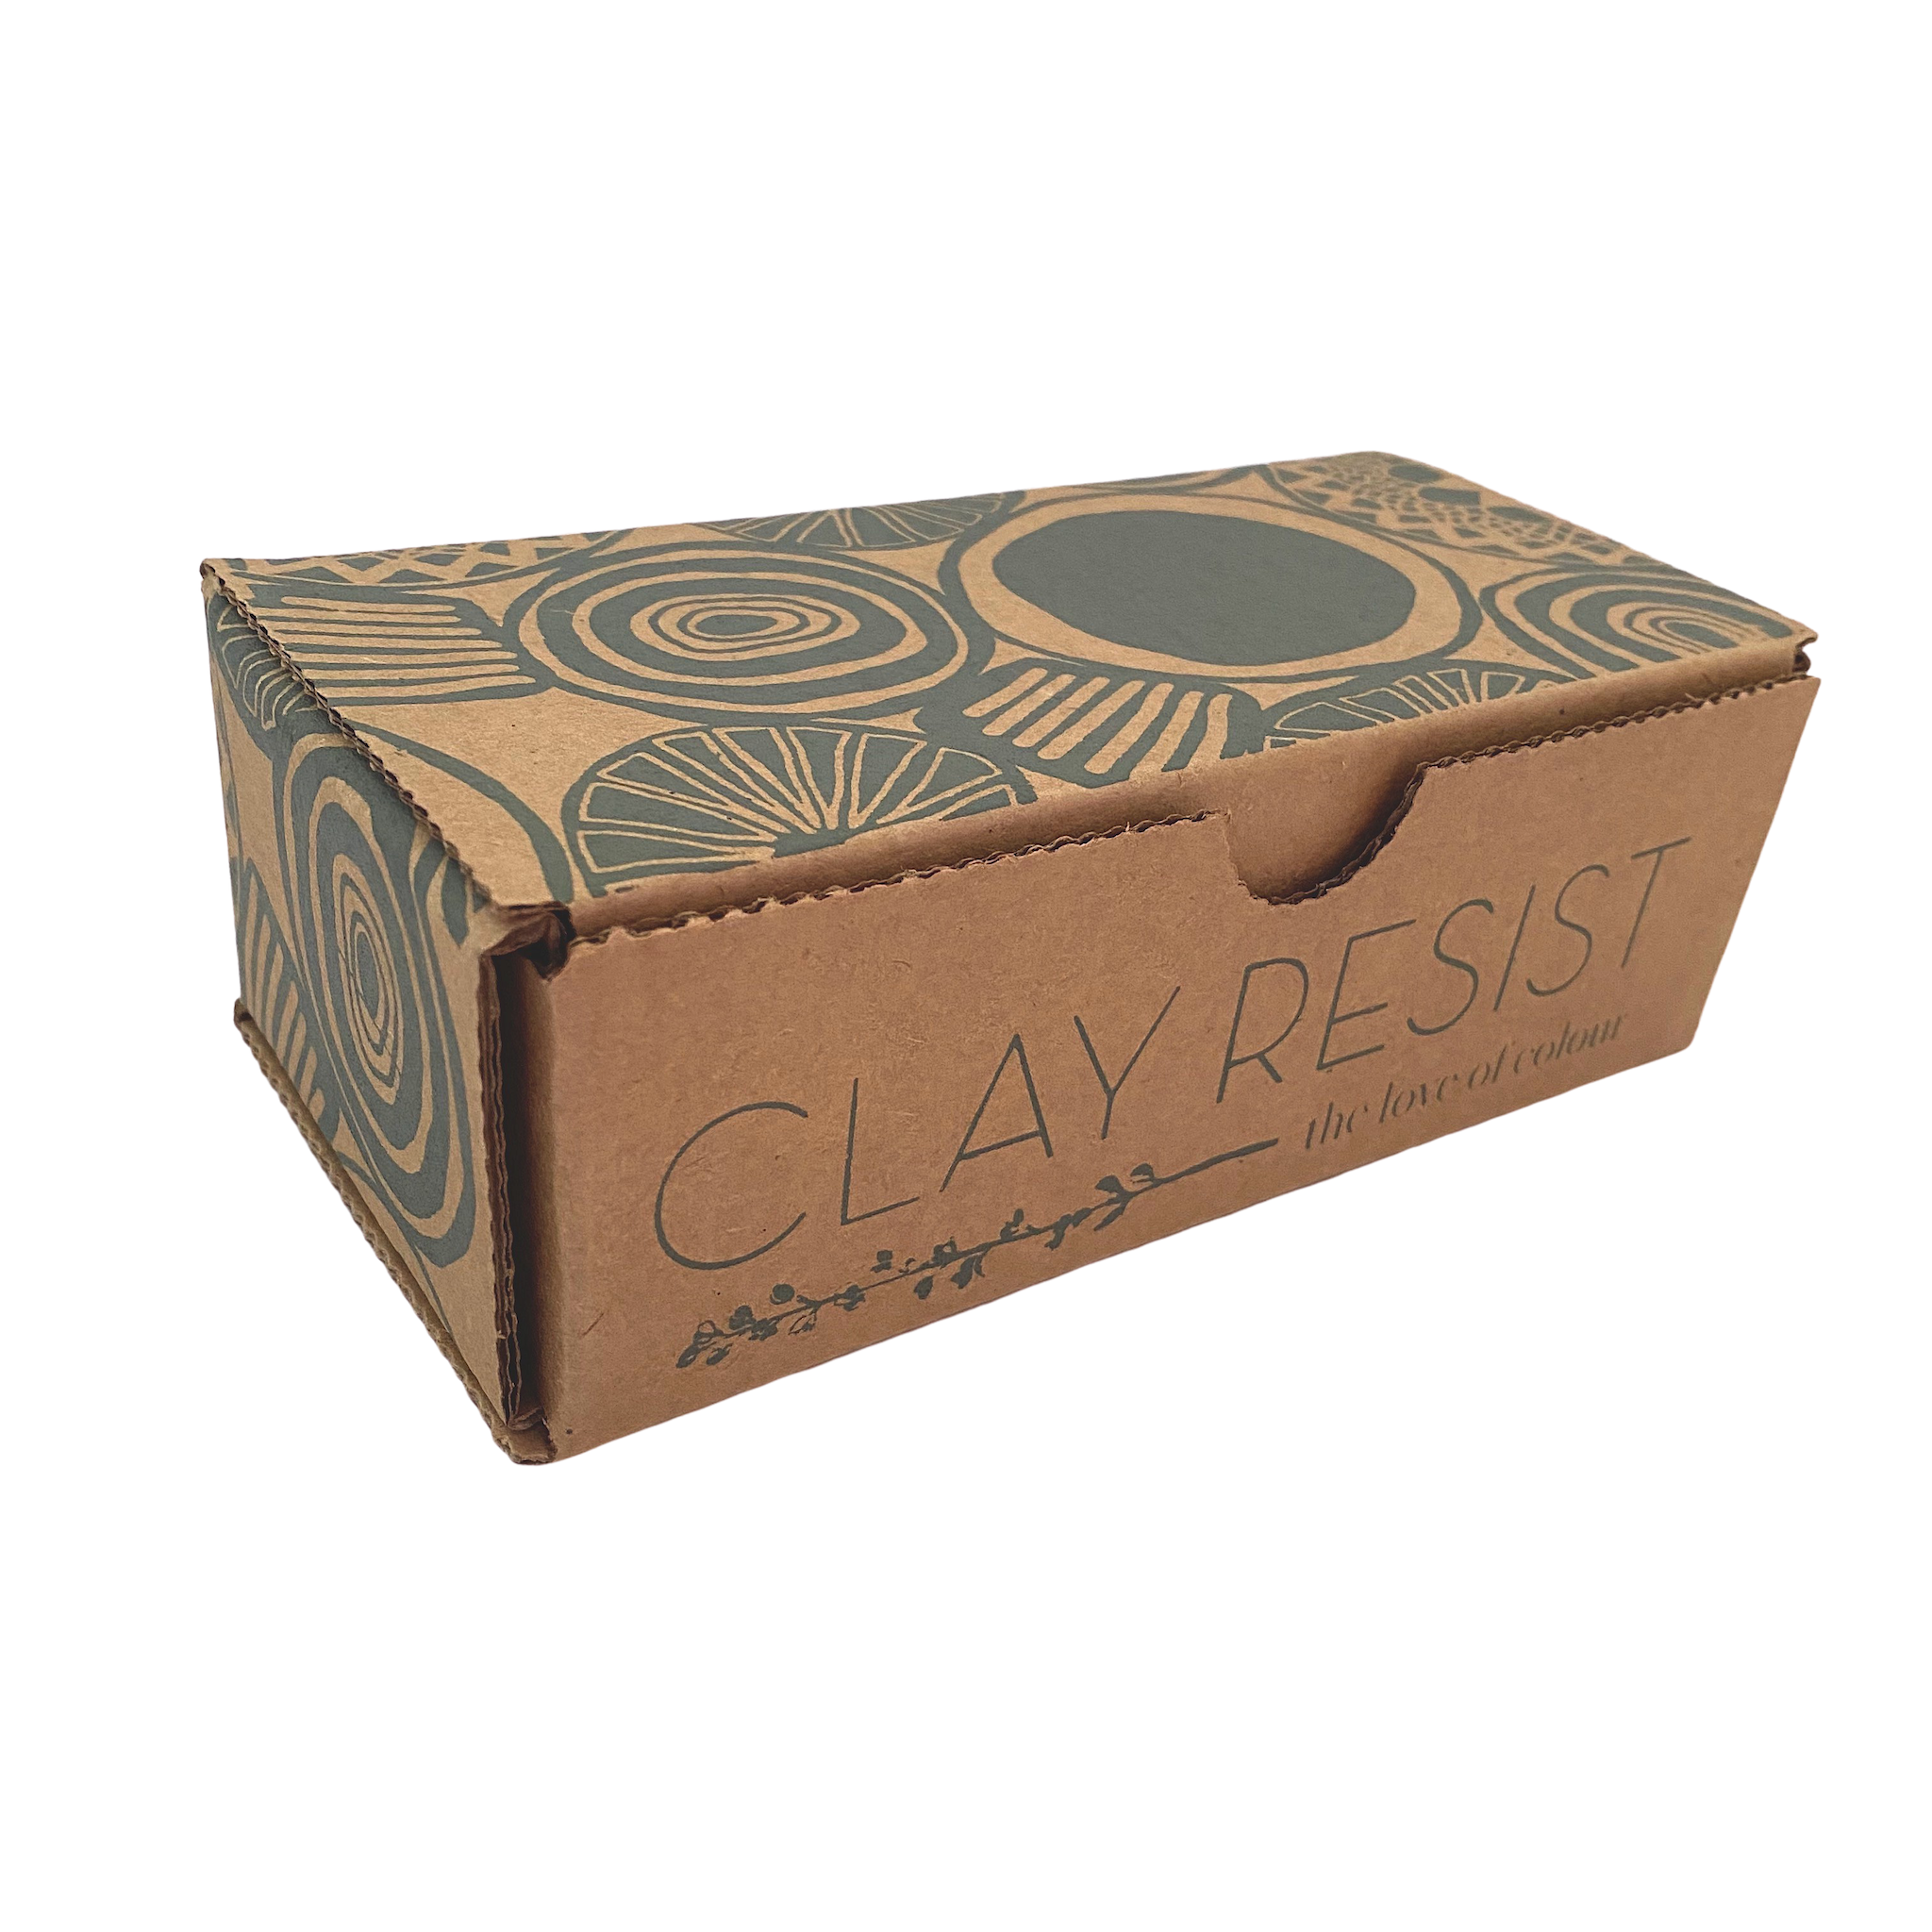 Cardboard box containing clay resist kit on white background. Box is printed with dark green circular motifs